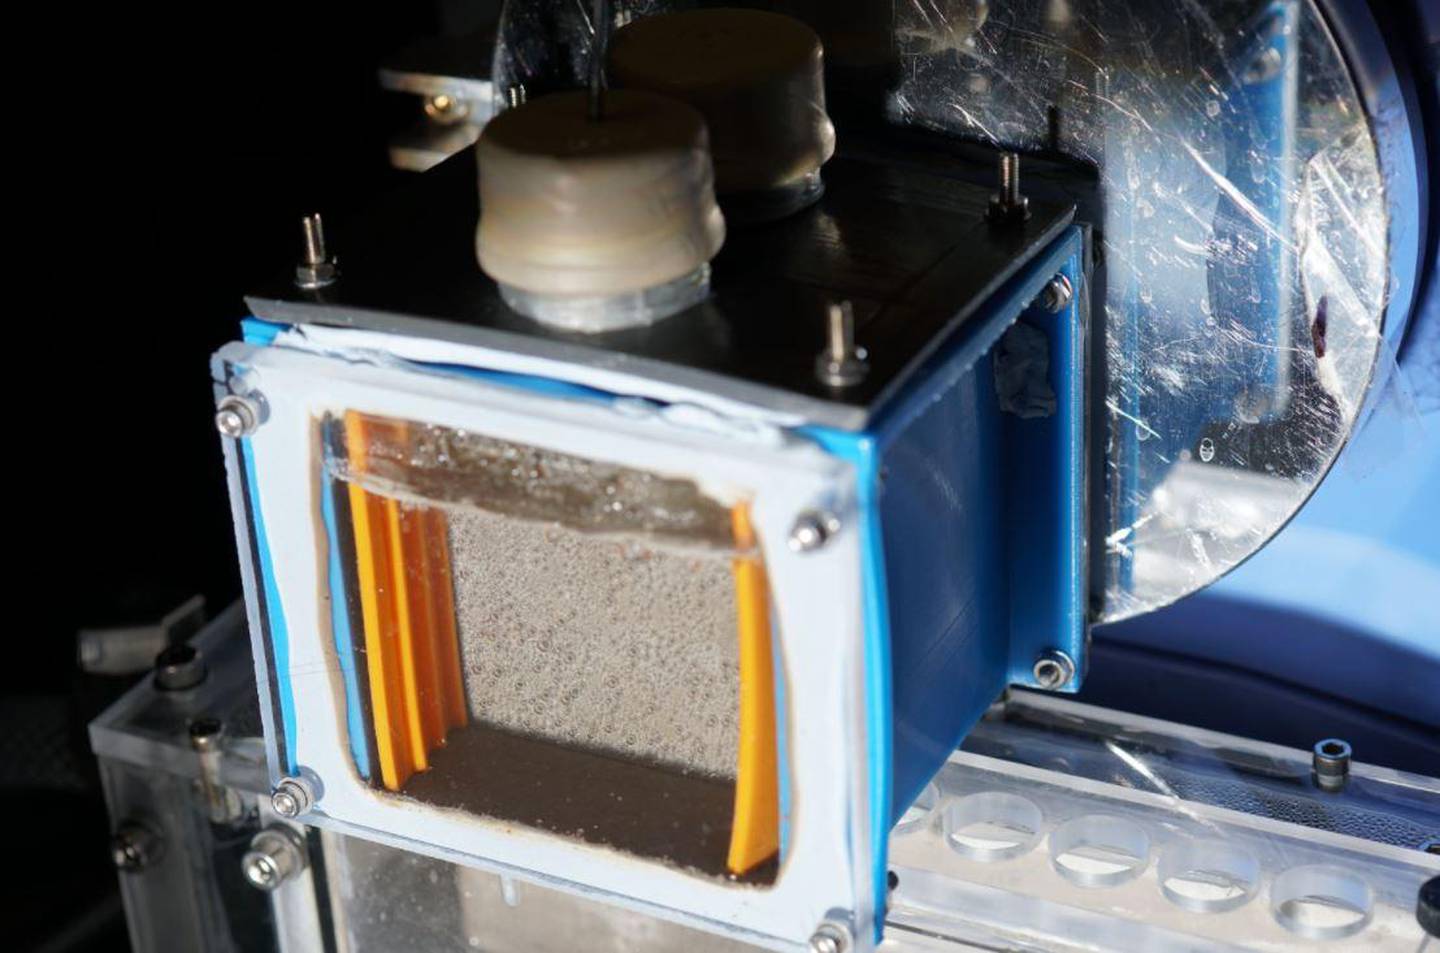 The device converts light, carbon dioxide and water into a clean and stable fuel that can either be used directly or converted into hydrogen. University of Cambridge